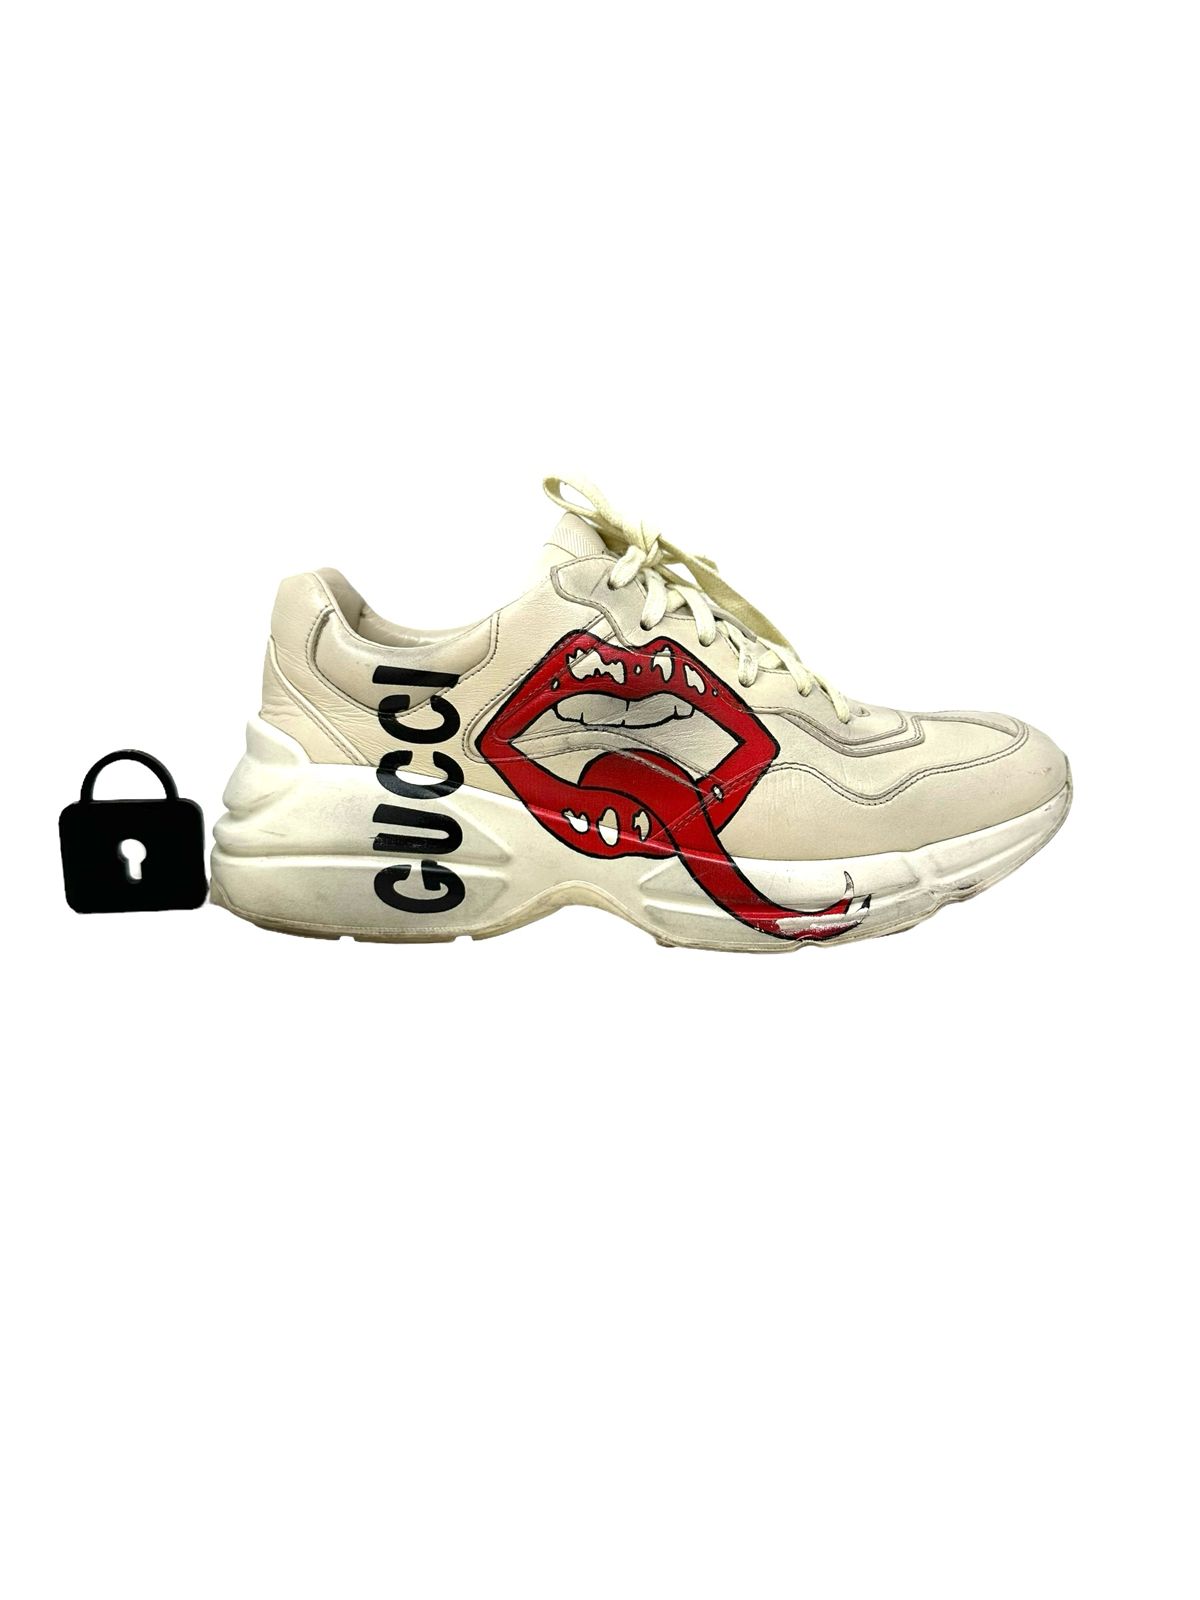 Rhyton Sneakers T9 FOR HIM